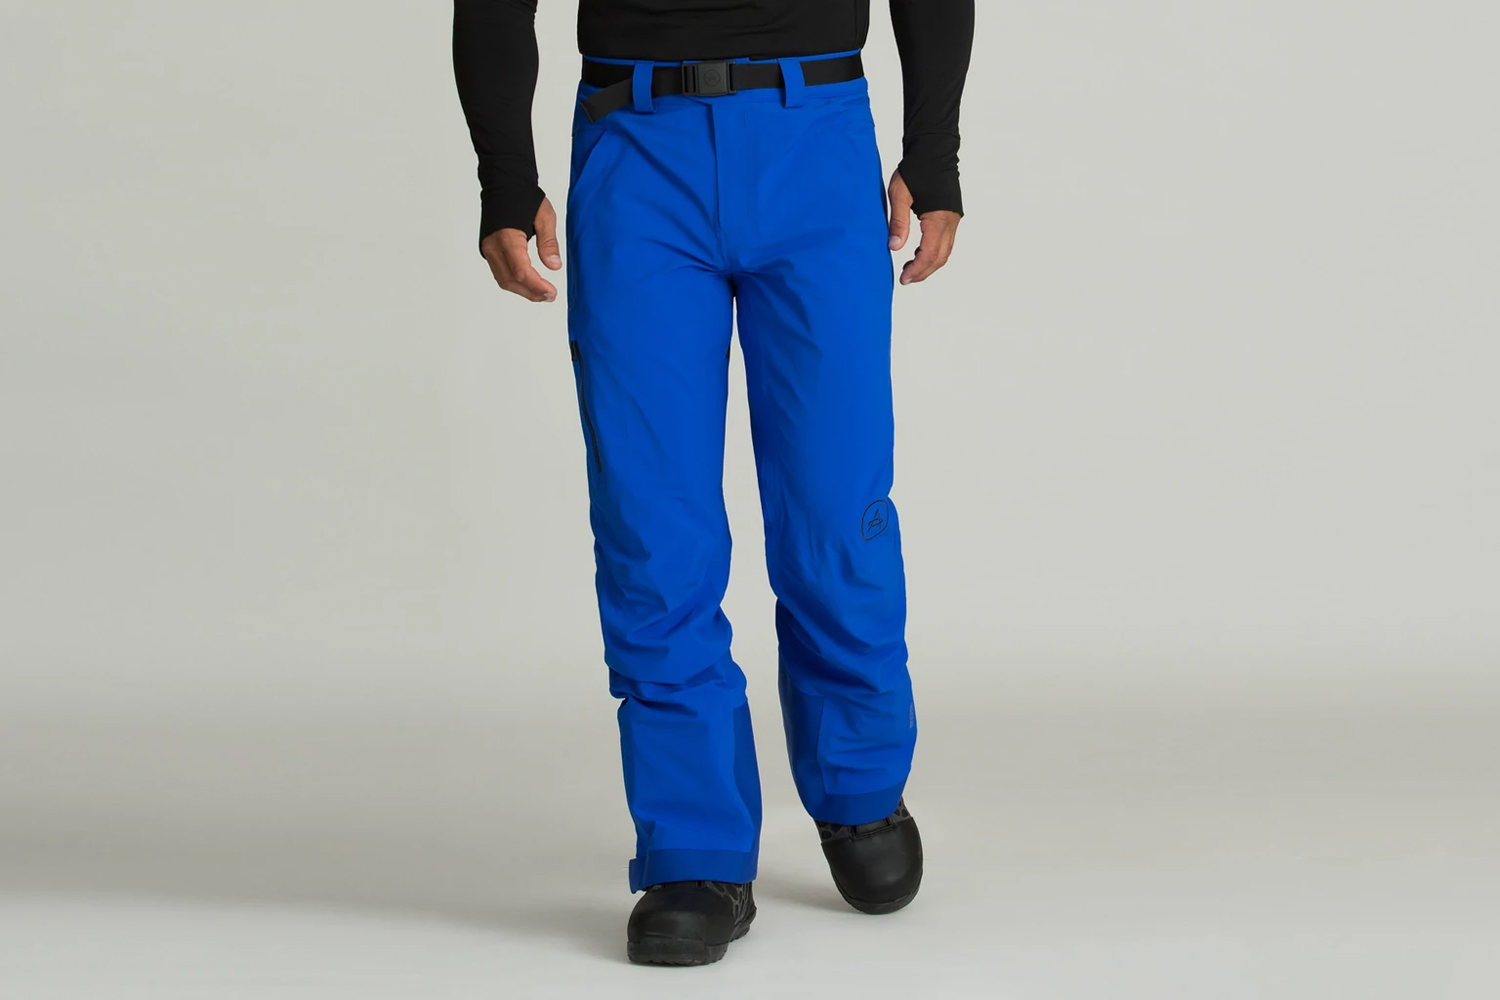 Aether Approach Snow Pant in bright blue on a beige background